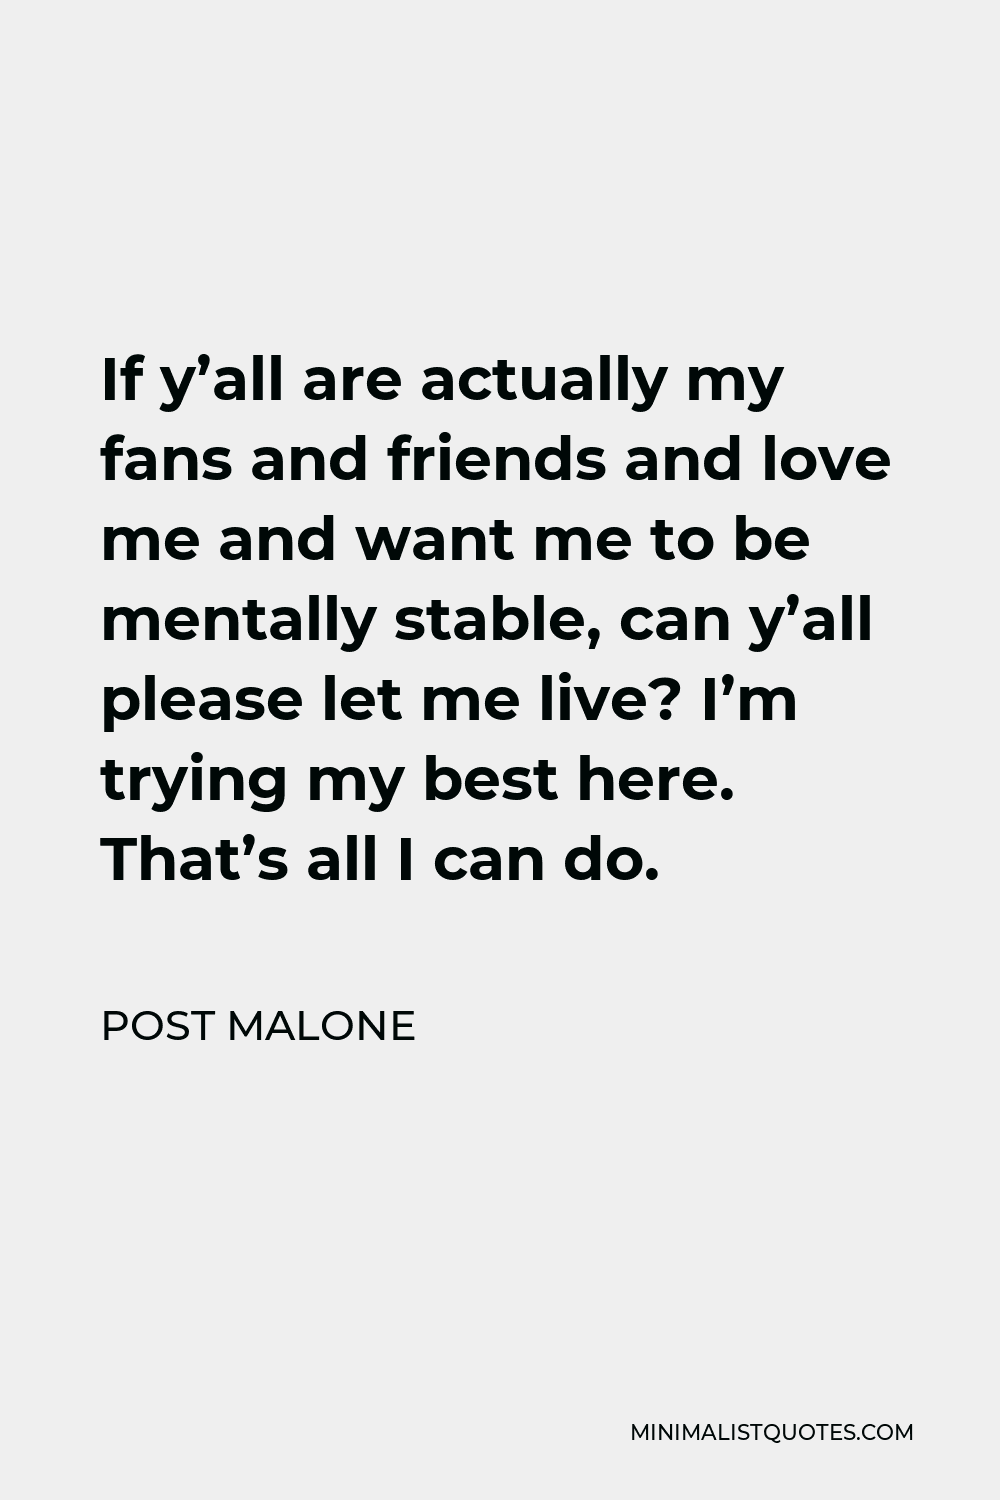 Post Malone Quote - If y’all are actually my fans and friends and love me and want me to be mentally stable, can y’all please let me live? I’m trying my best here. That’s all I can do.